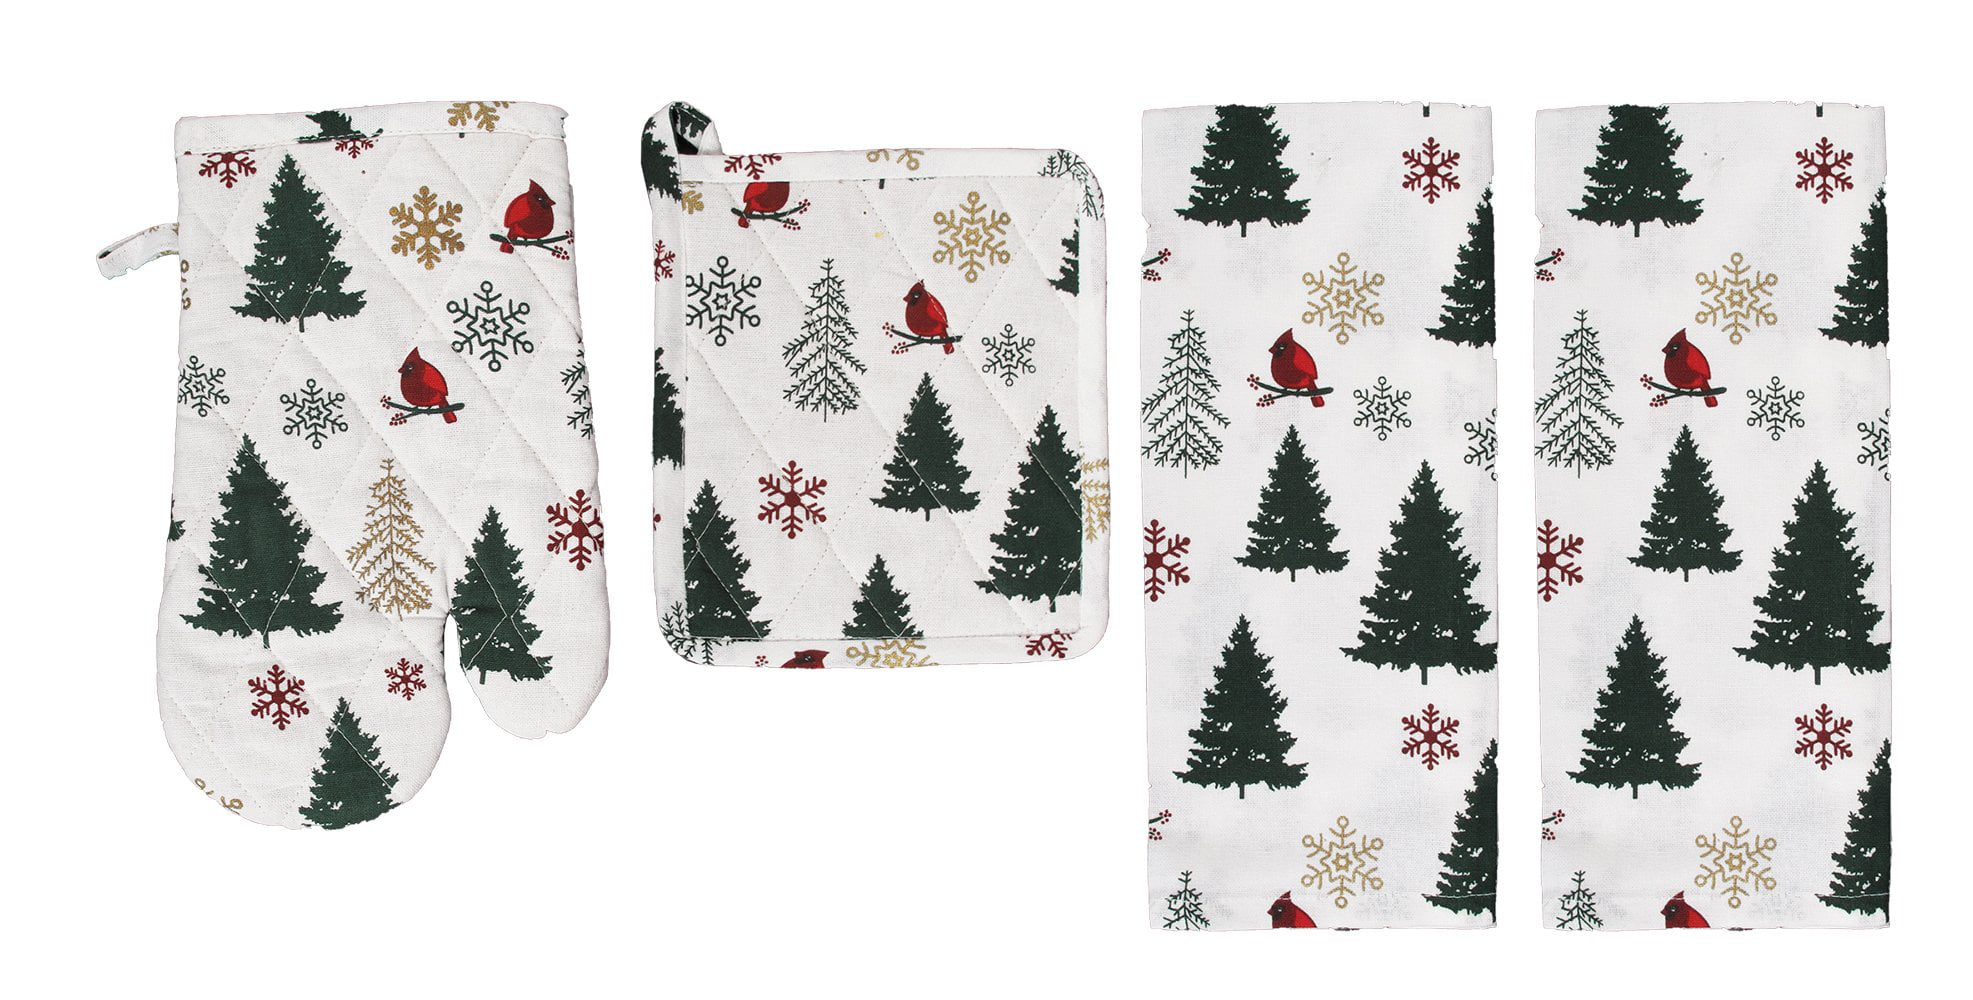 CHRISTMAS THEME BRODER HAPPY HOLIDAYS 15"x25" SET of 2 PRINTED KITCHEN TOWELS 